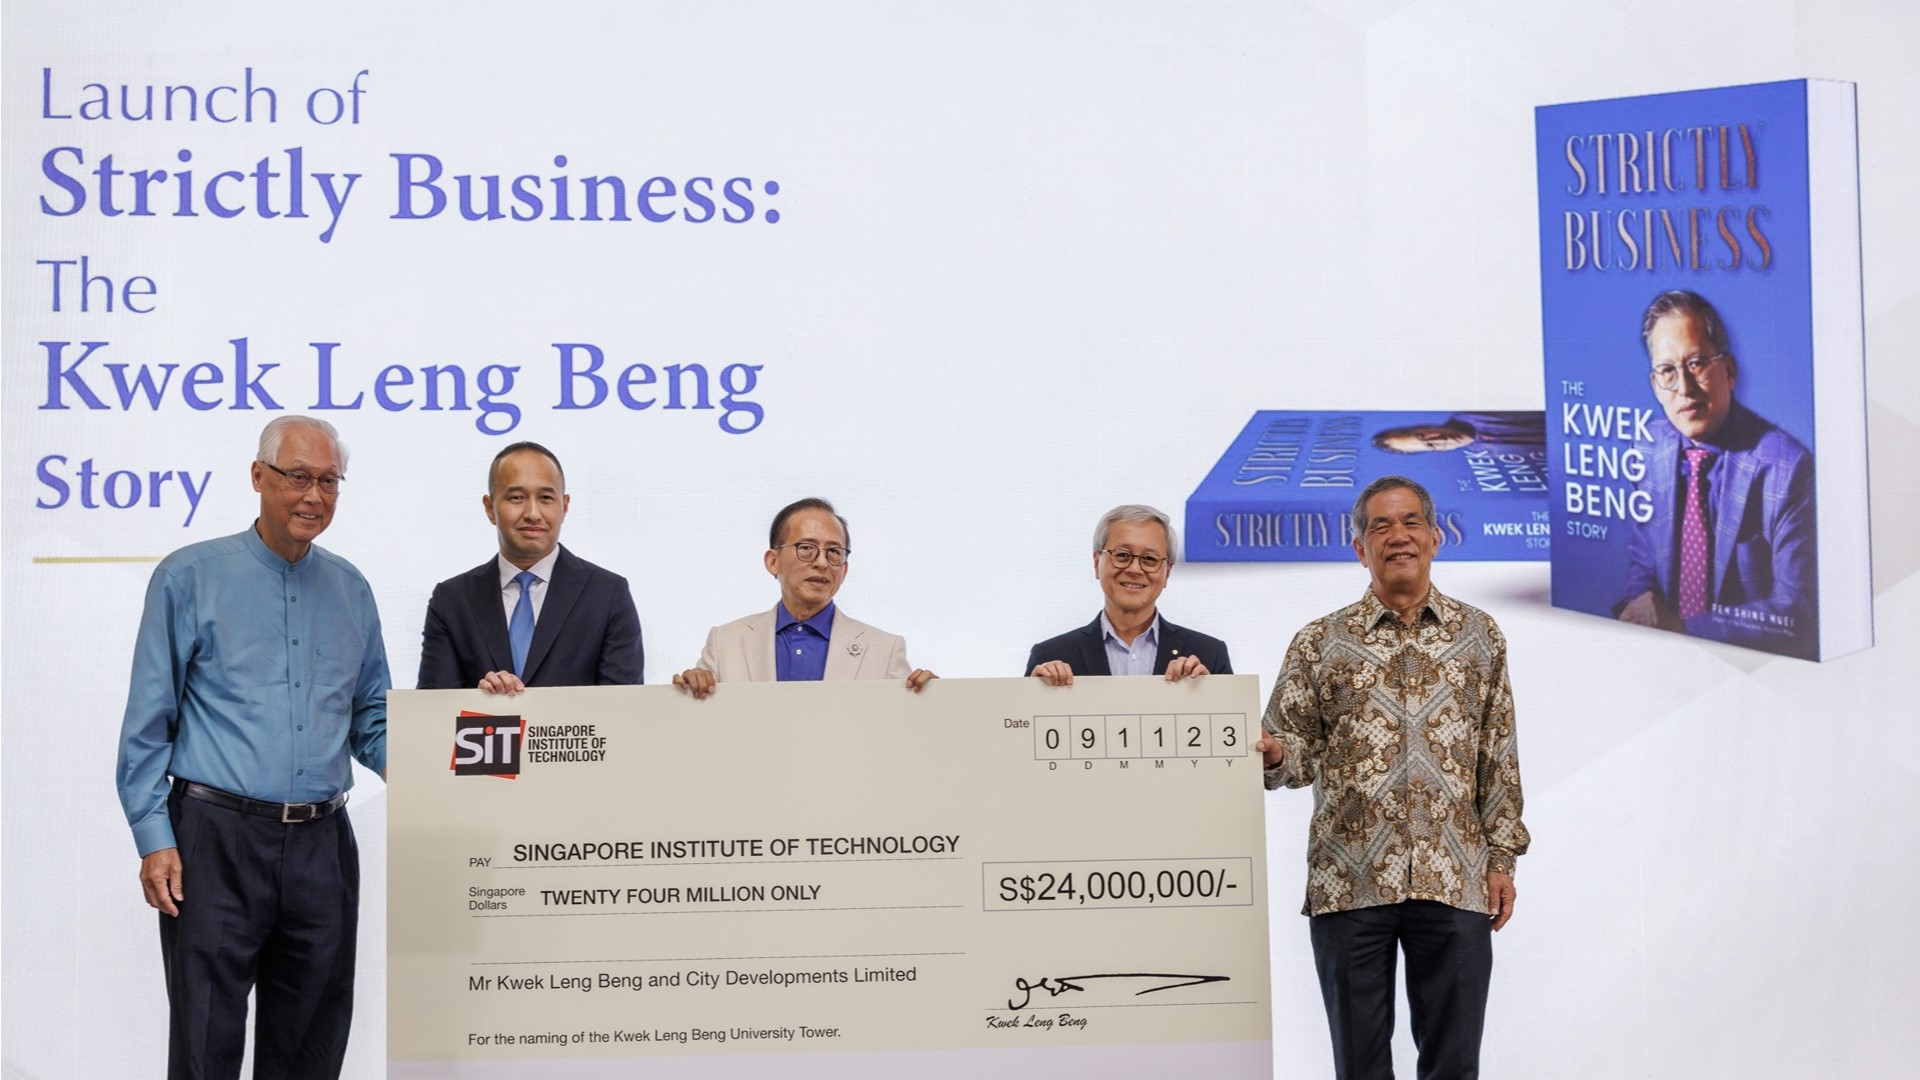 cheque donation of S$24 million to SIT